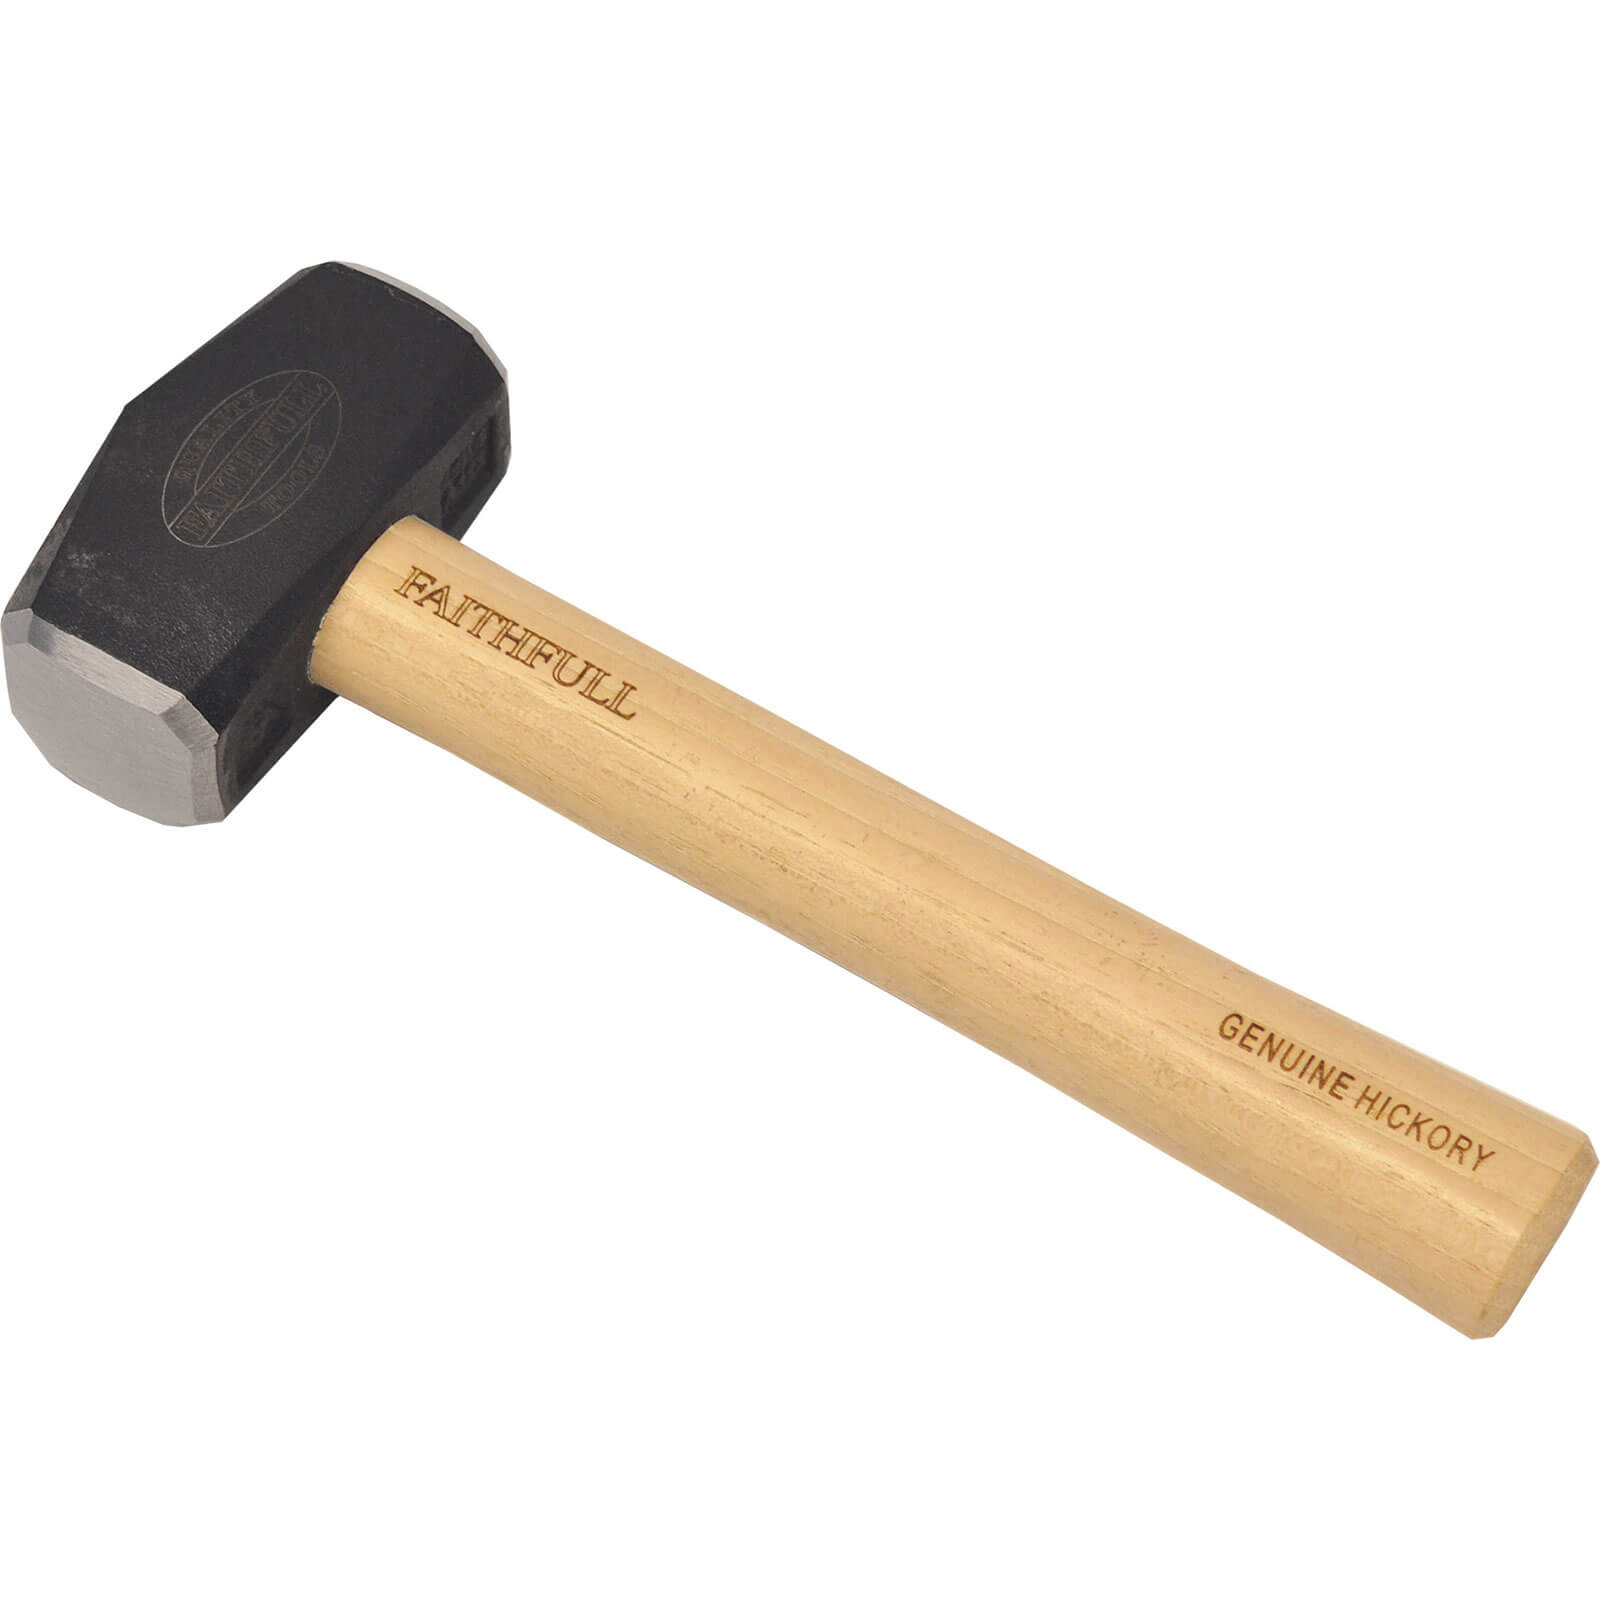 Image of Faithfull Contractors Club Hammer 1.8kg